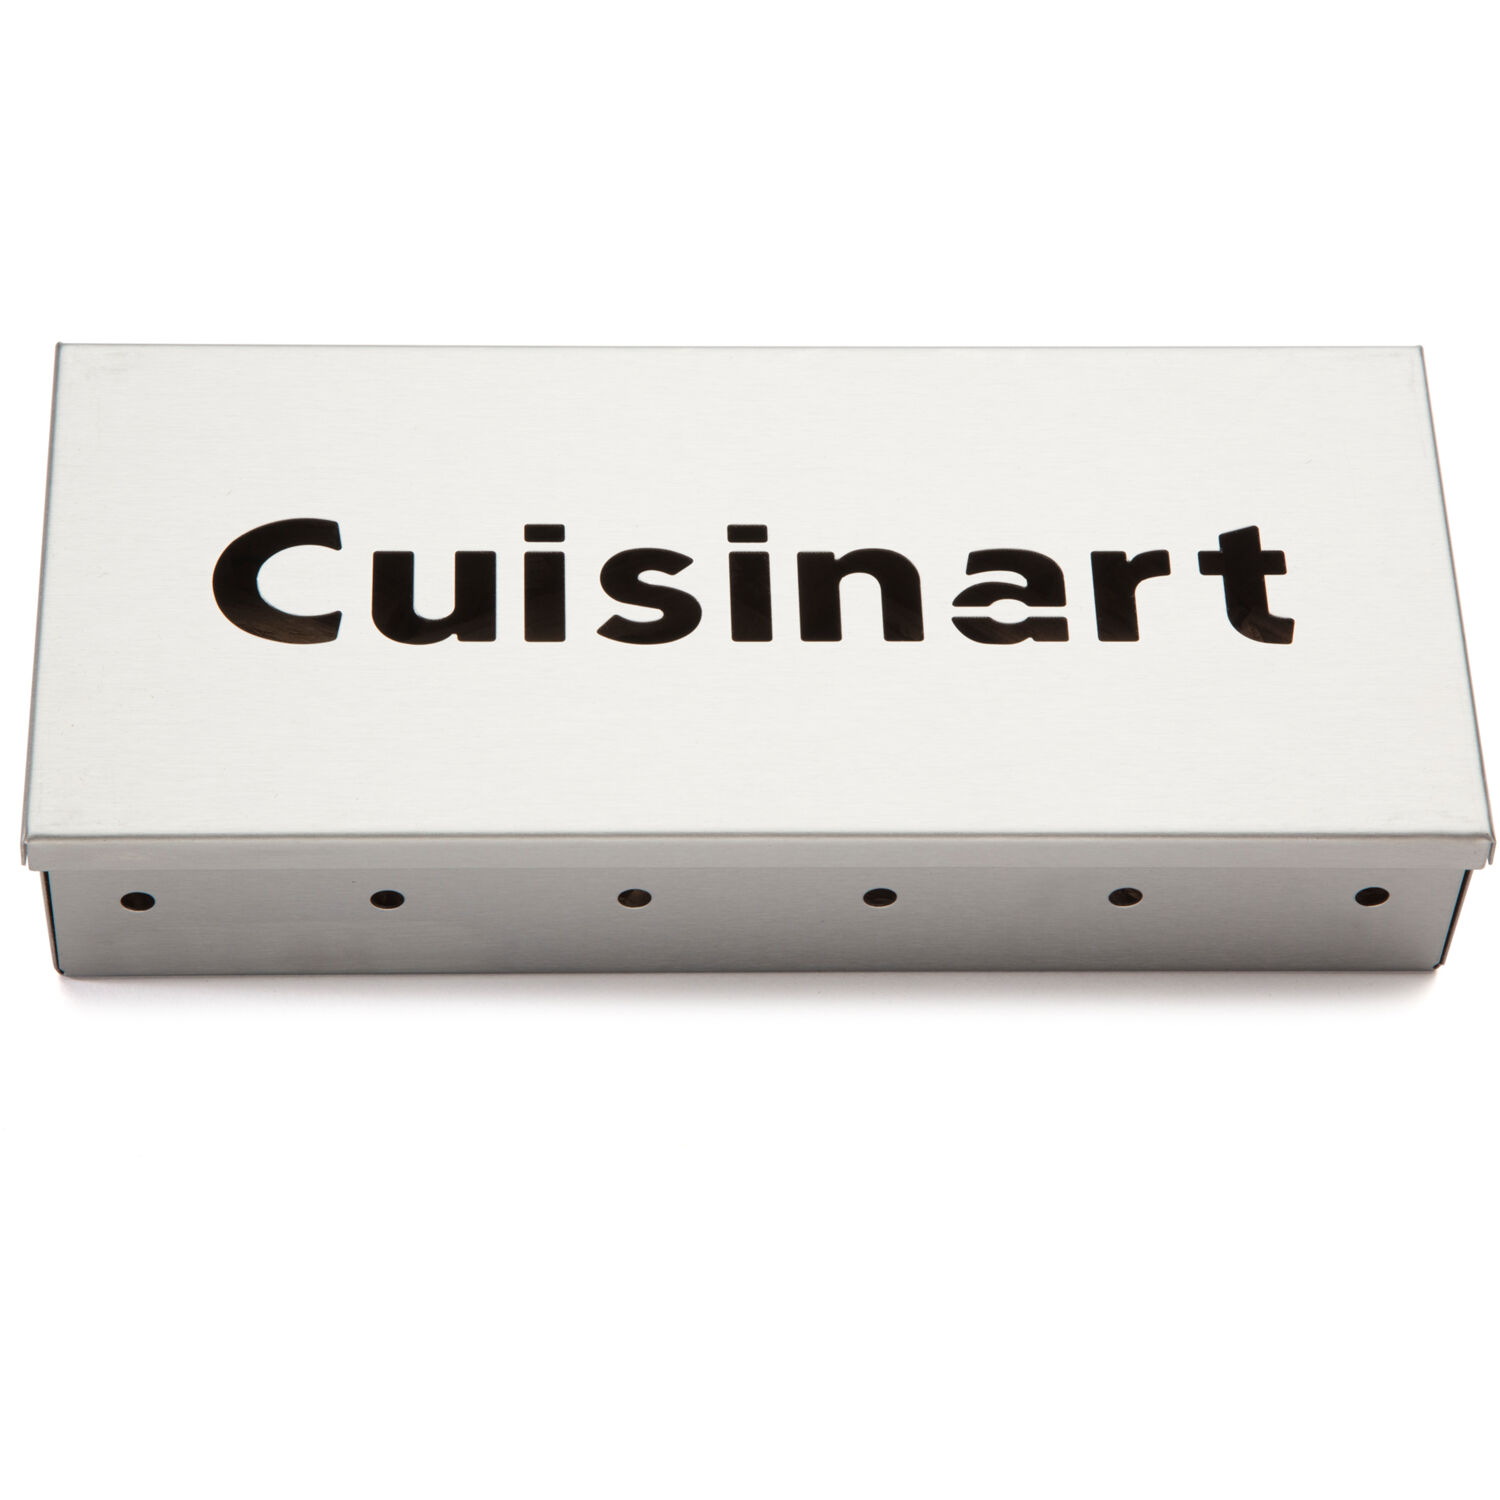 Cuisinart Wood Chip Smoker Box in Stainless Steel - image 1 of 8